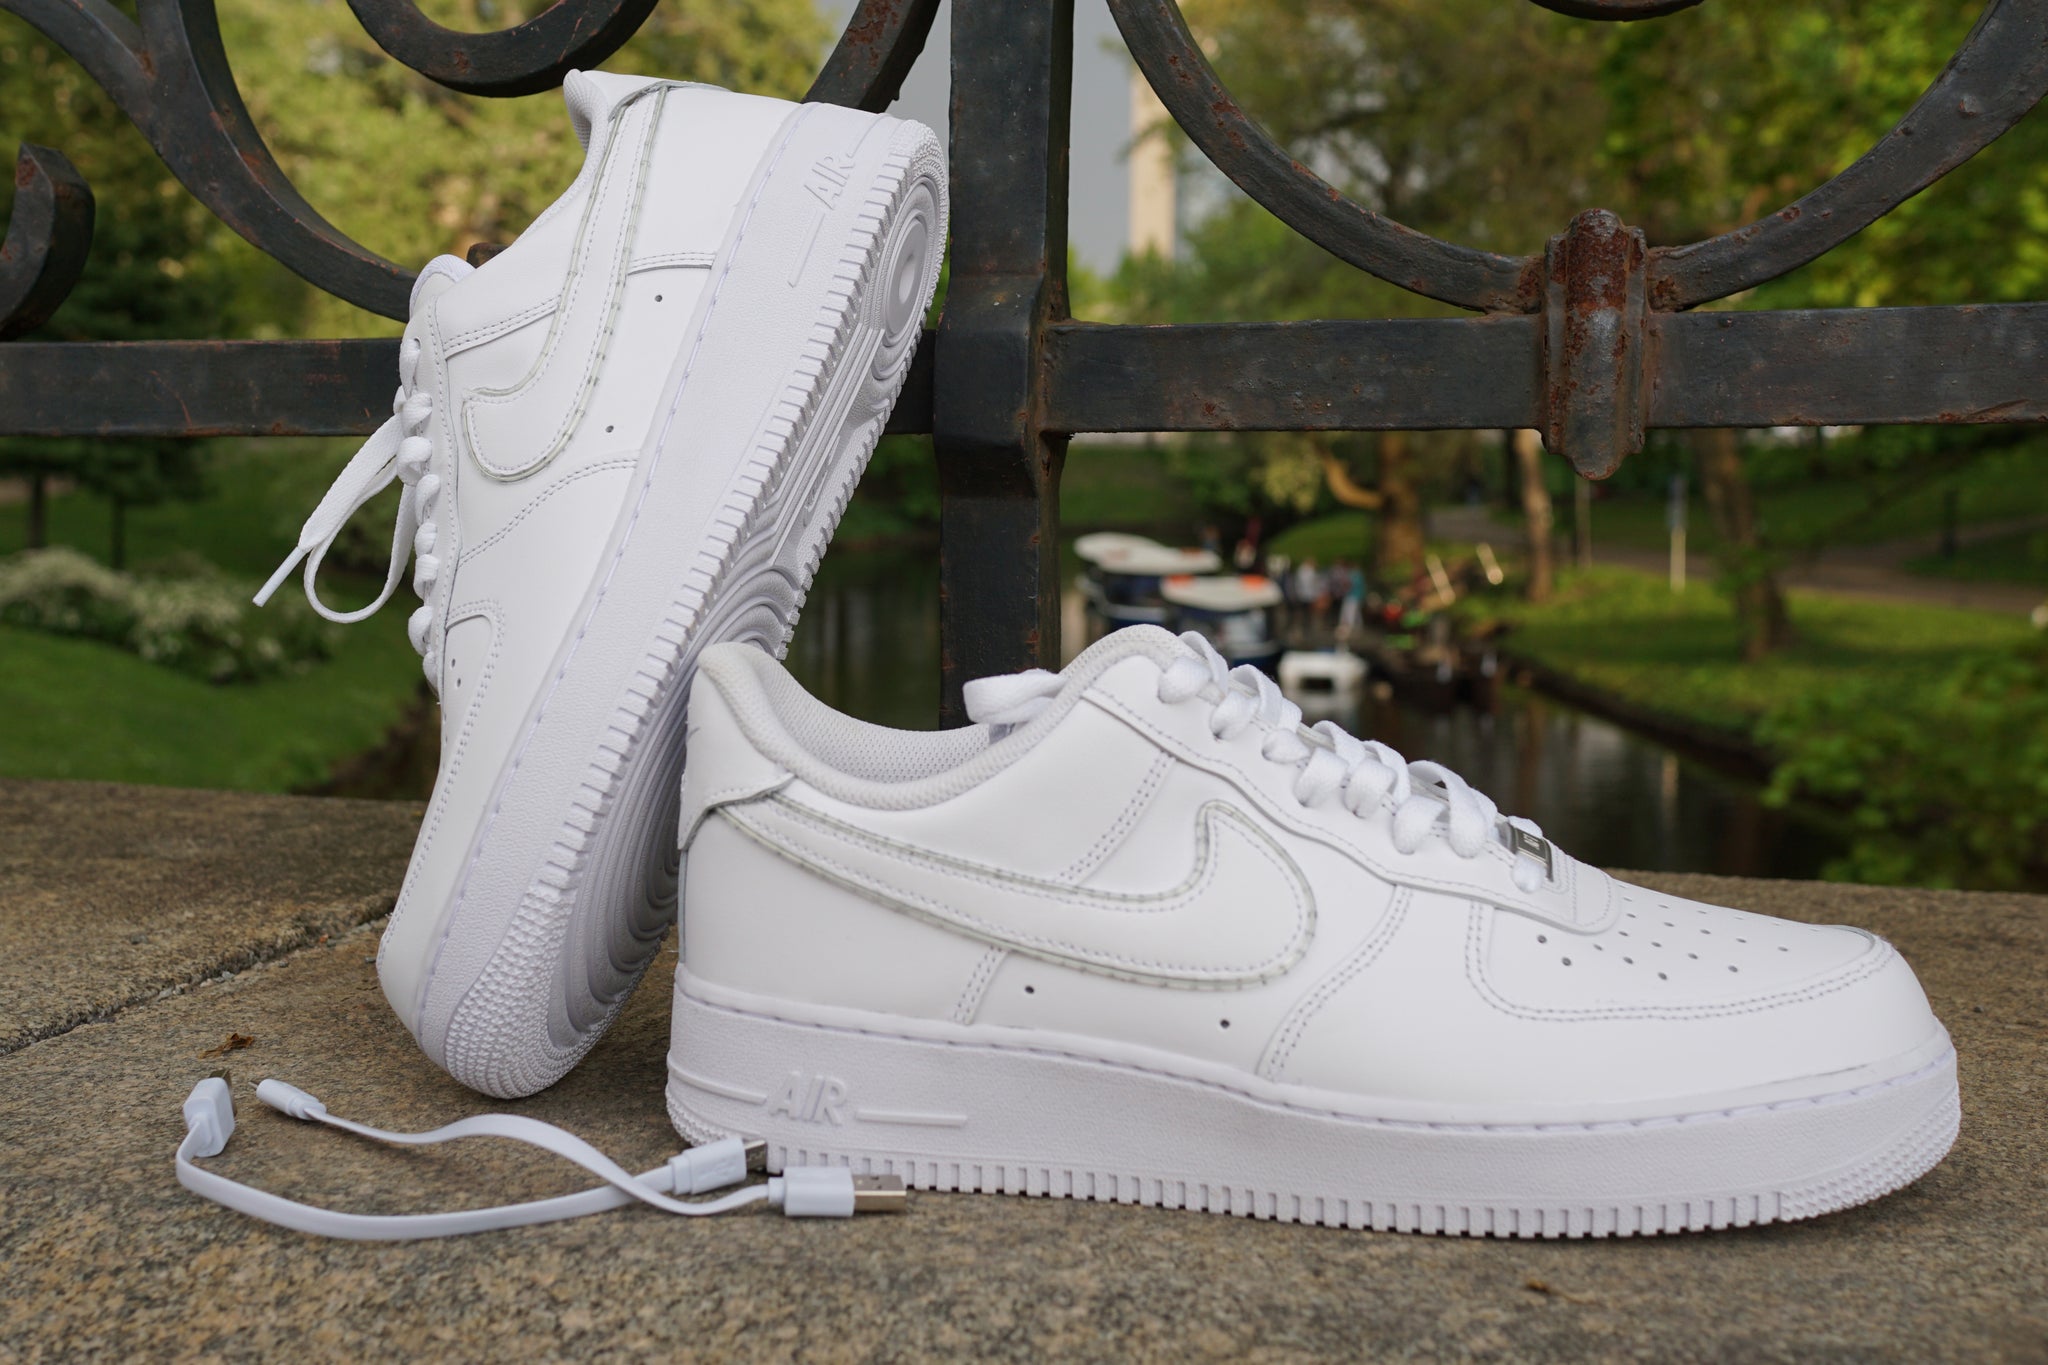 Light Up Nike Air Force 1's '07 ICE BLUE Womens